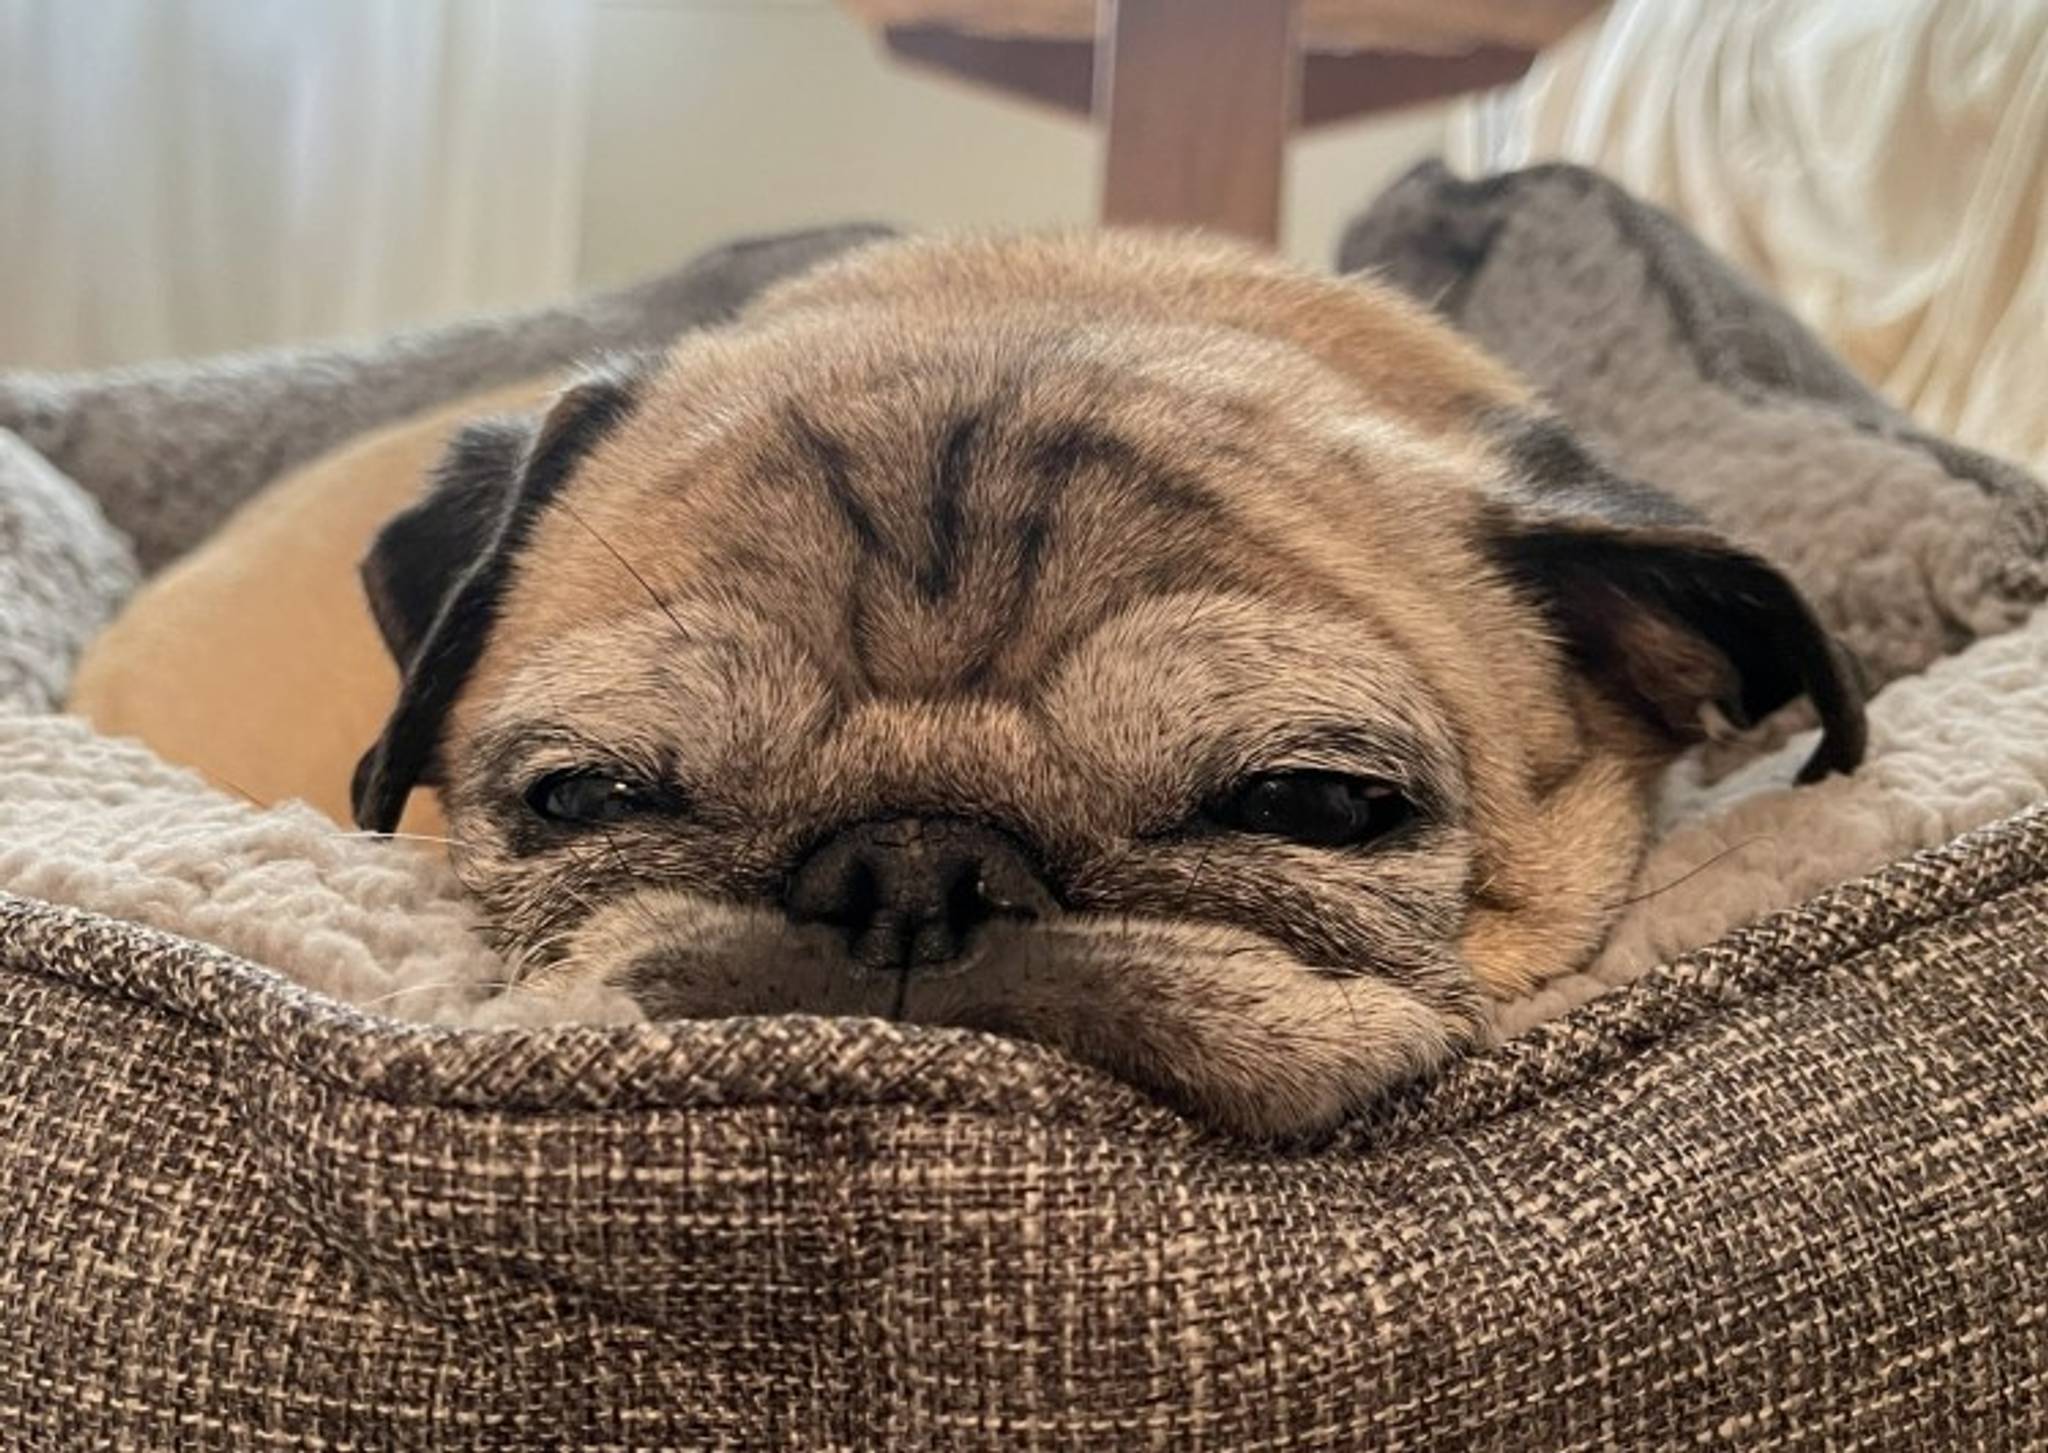 Noodle the pug is made online oracle of burnout